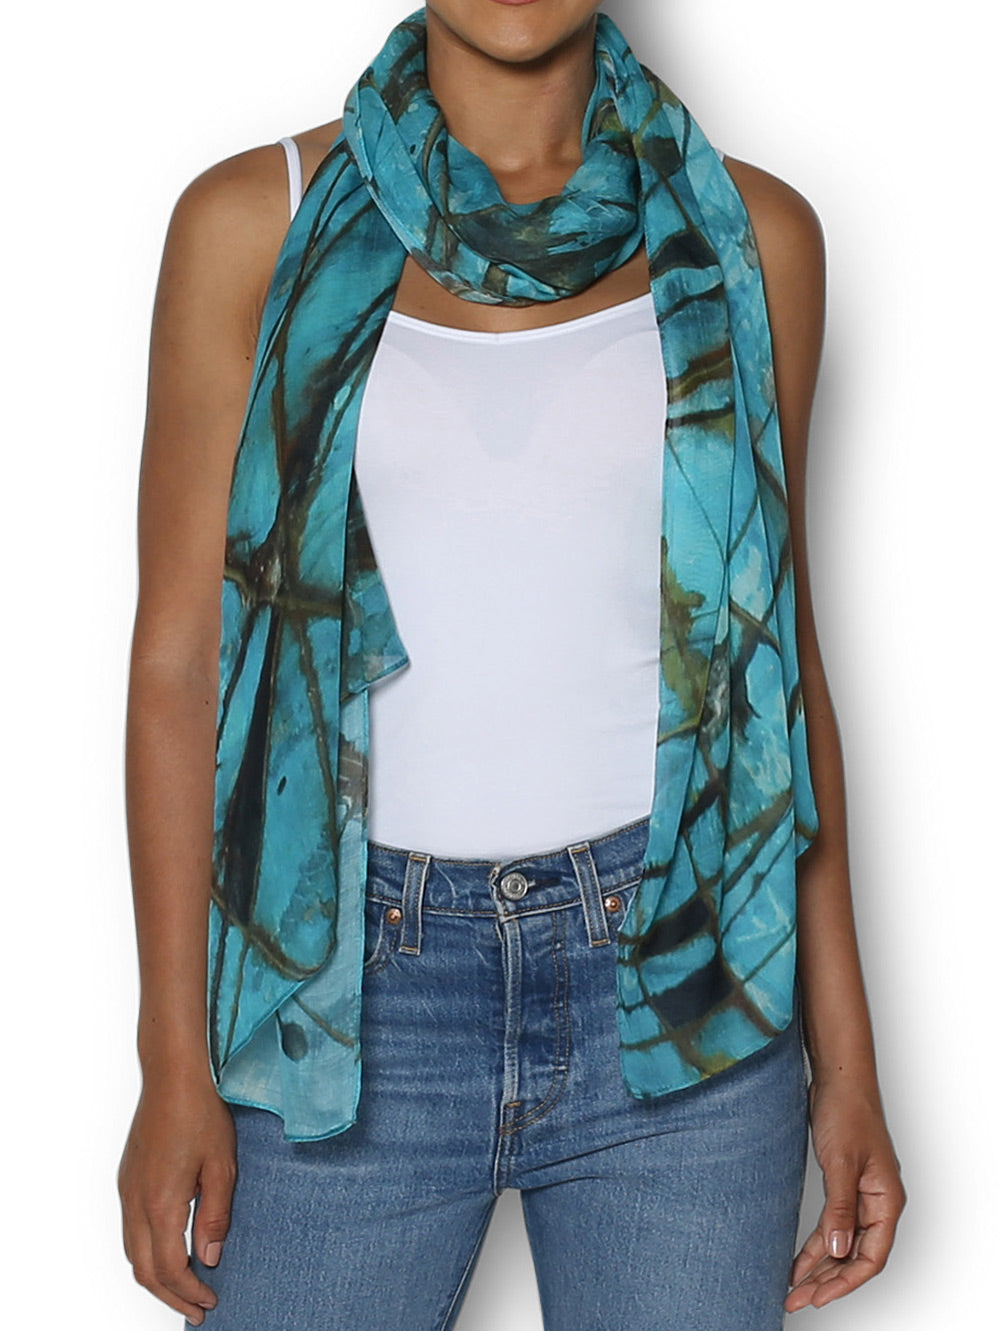 THE ARTISTS LABEL SEASIDE STONE SCARF